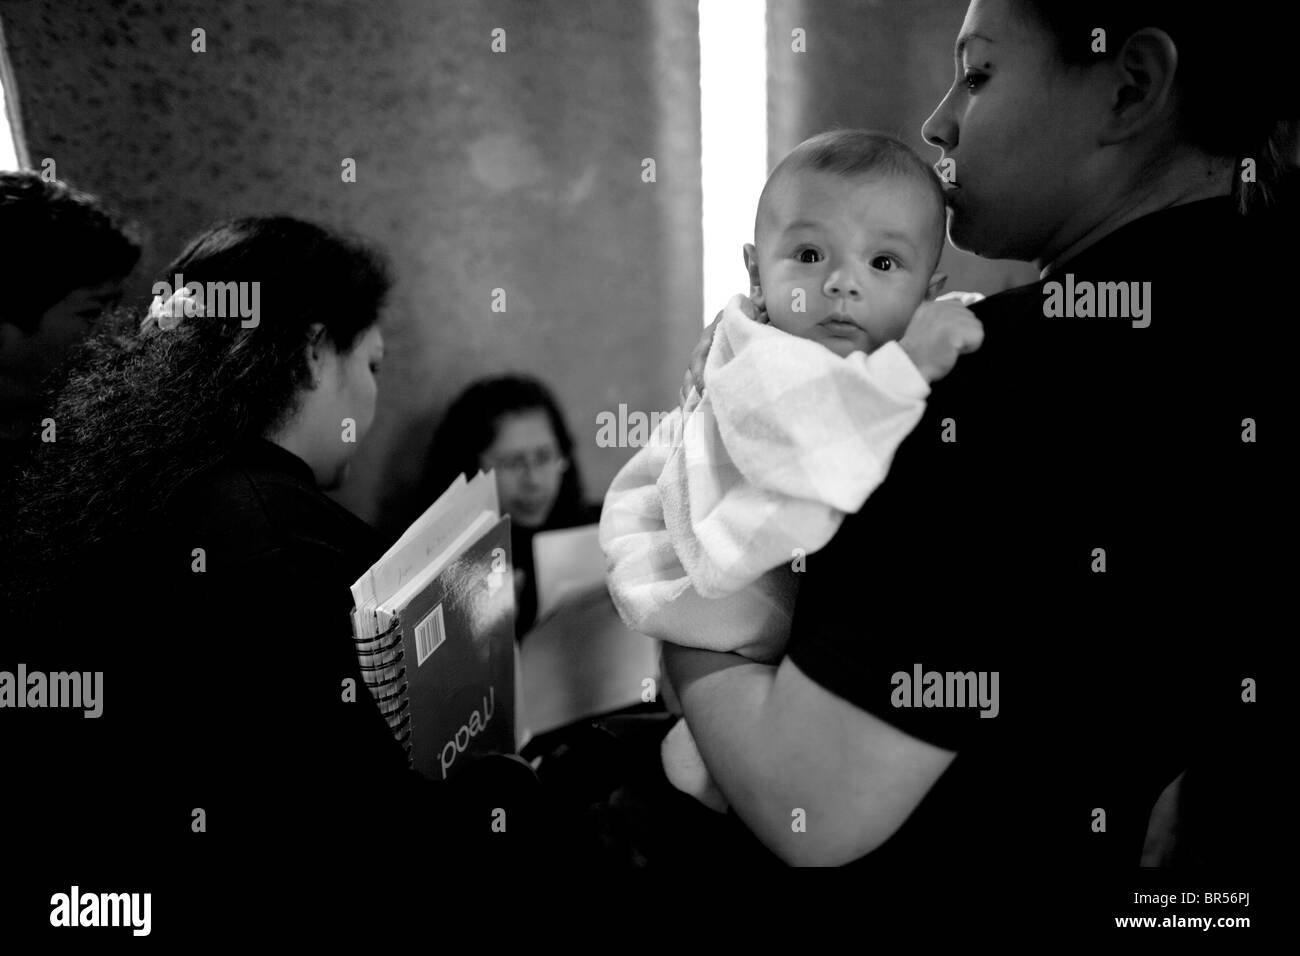 A prison mother with her baby inside a female penitentiary in Mexico D.F. Stock Photo